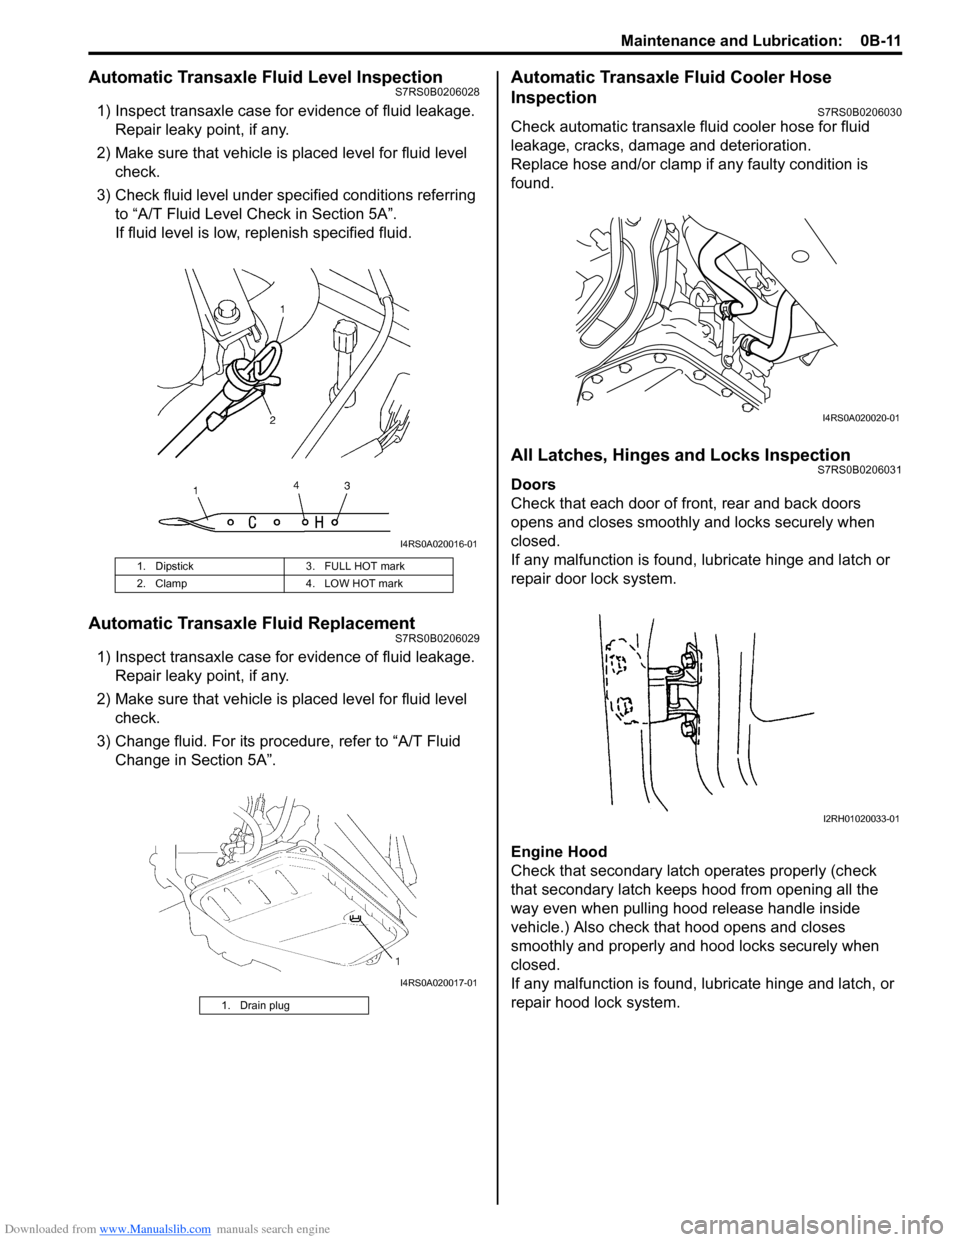 SUZUKI SWIFT 2006 2.G Service Workshop Manual Downloaded from www.Manualslib.com manuals search engine Maintenance and Lubrication:  0B-11
Automatic Transaxle Fluid Level InspectionS7RS0B0206028
1) Inspect transaxle case for evidence of fluid lea